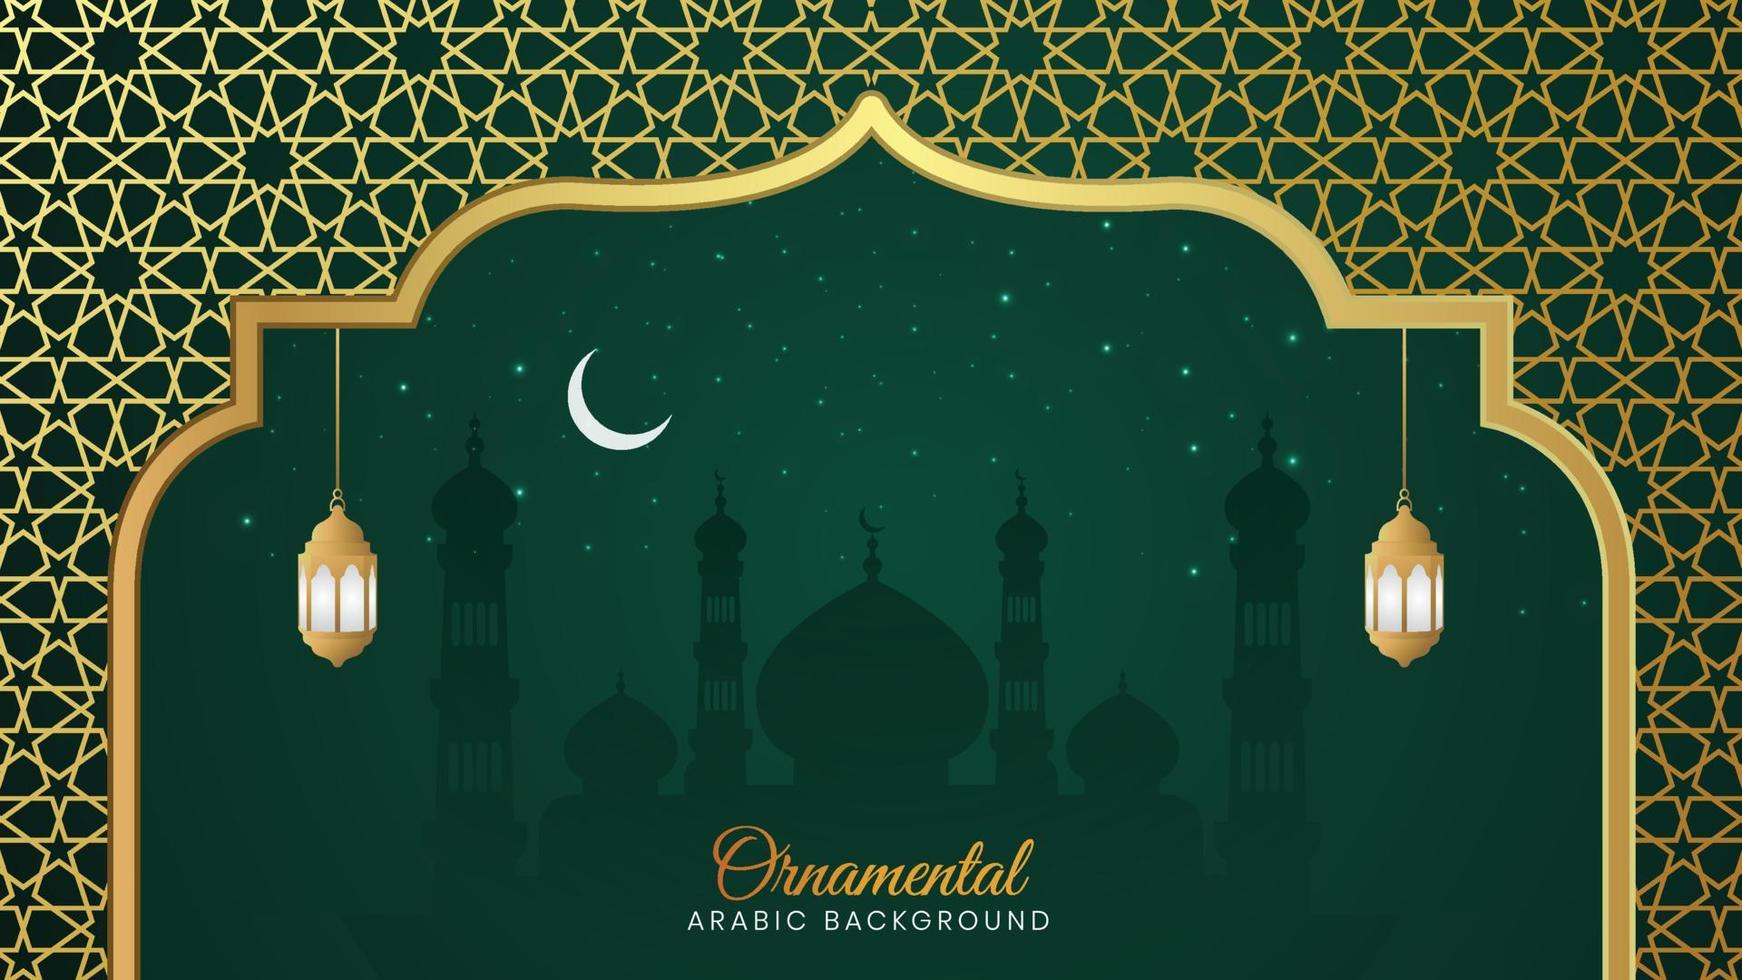 Ornamental Islamic Arch Pattern Background With Arabic Style Lanterns and Crescent Moon and Mosque vector